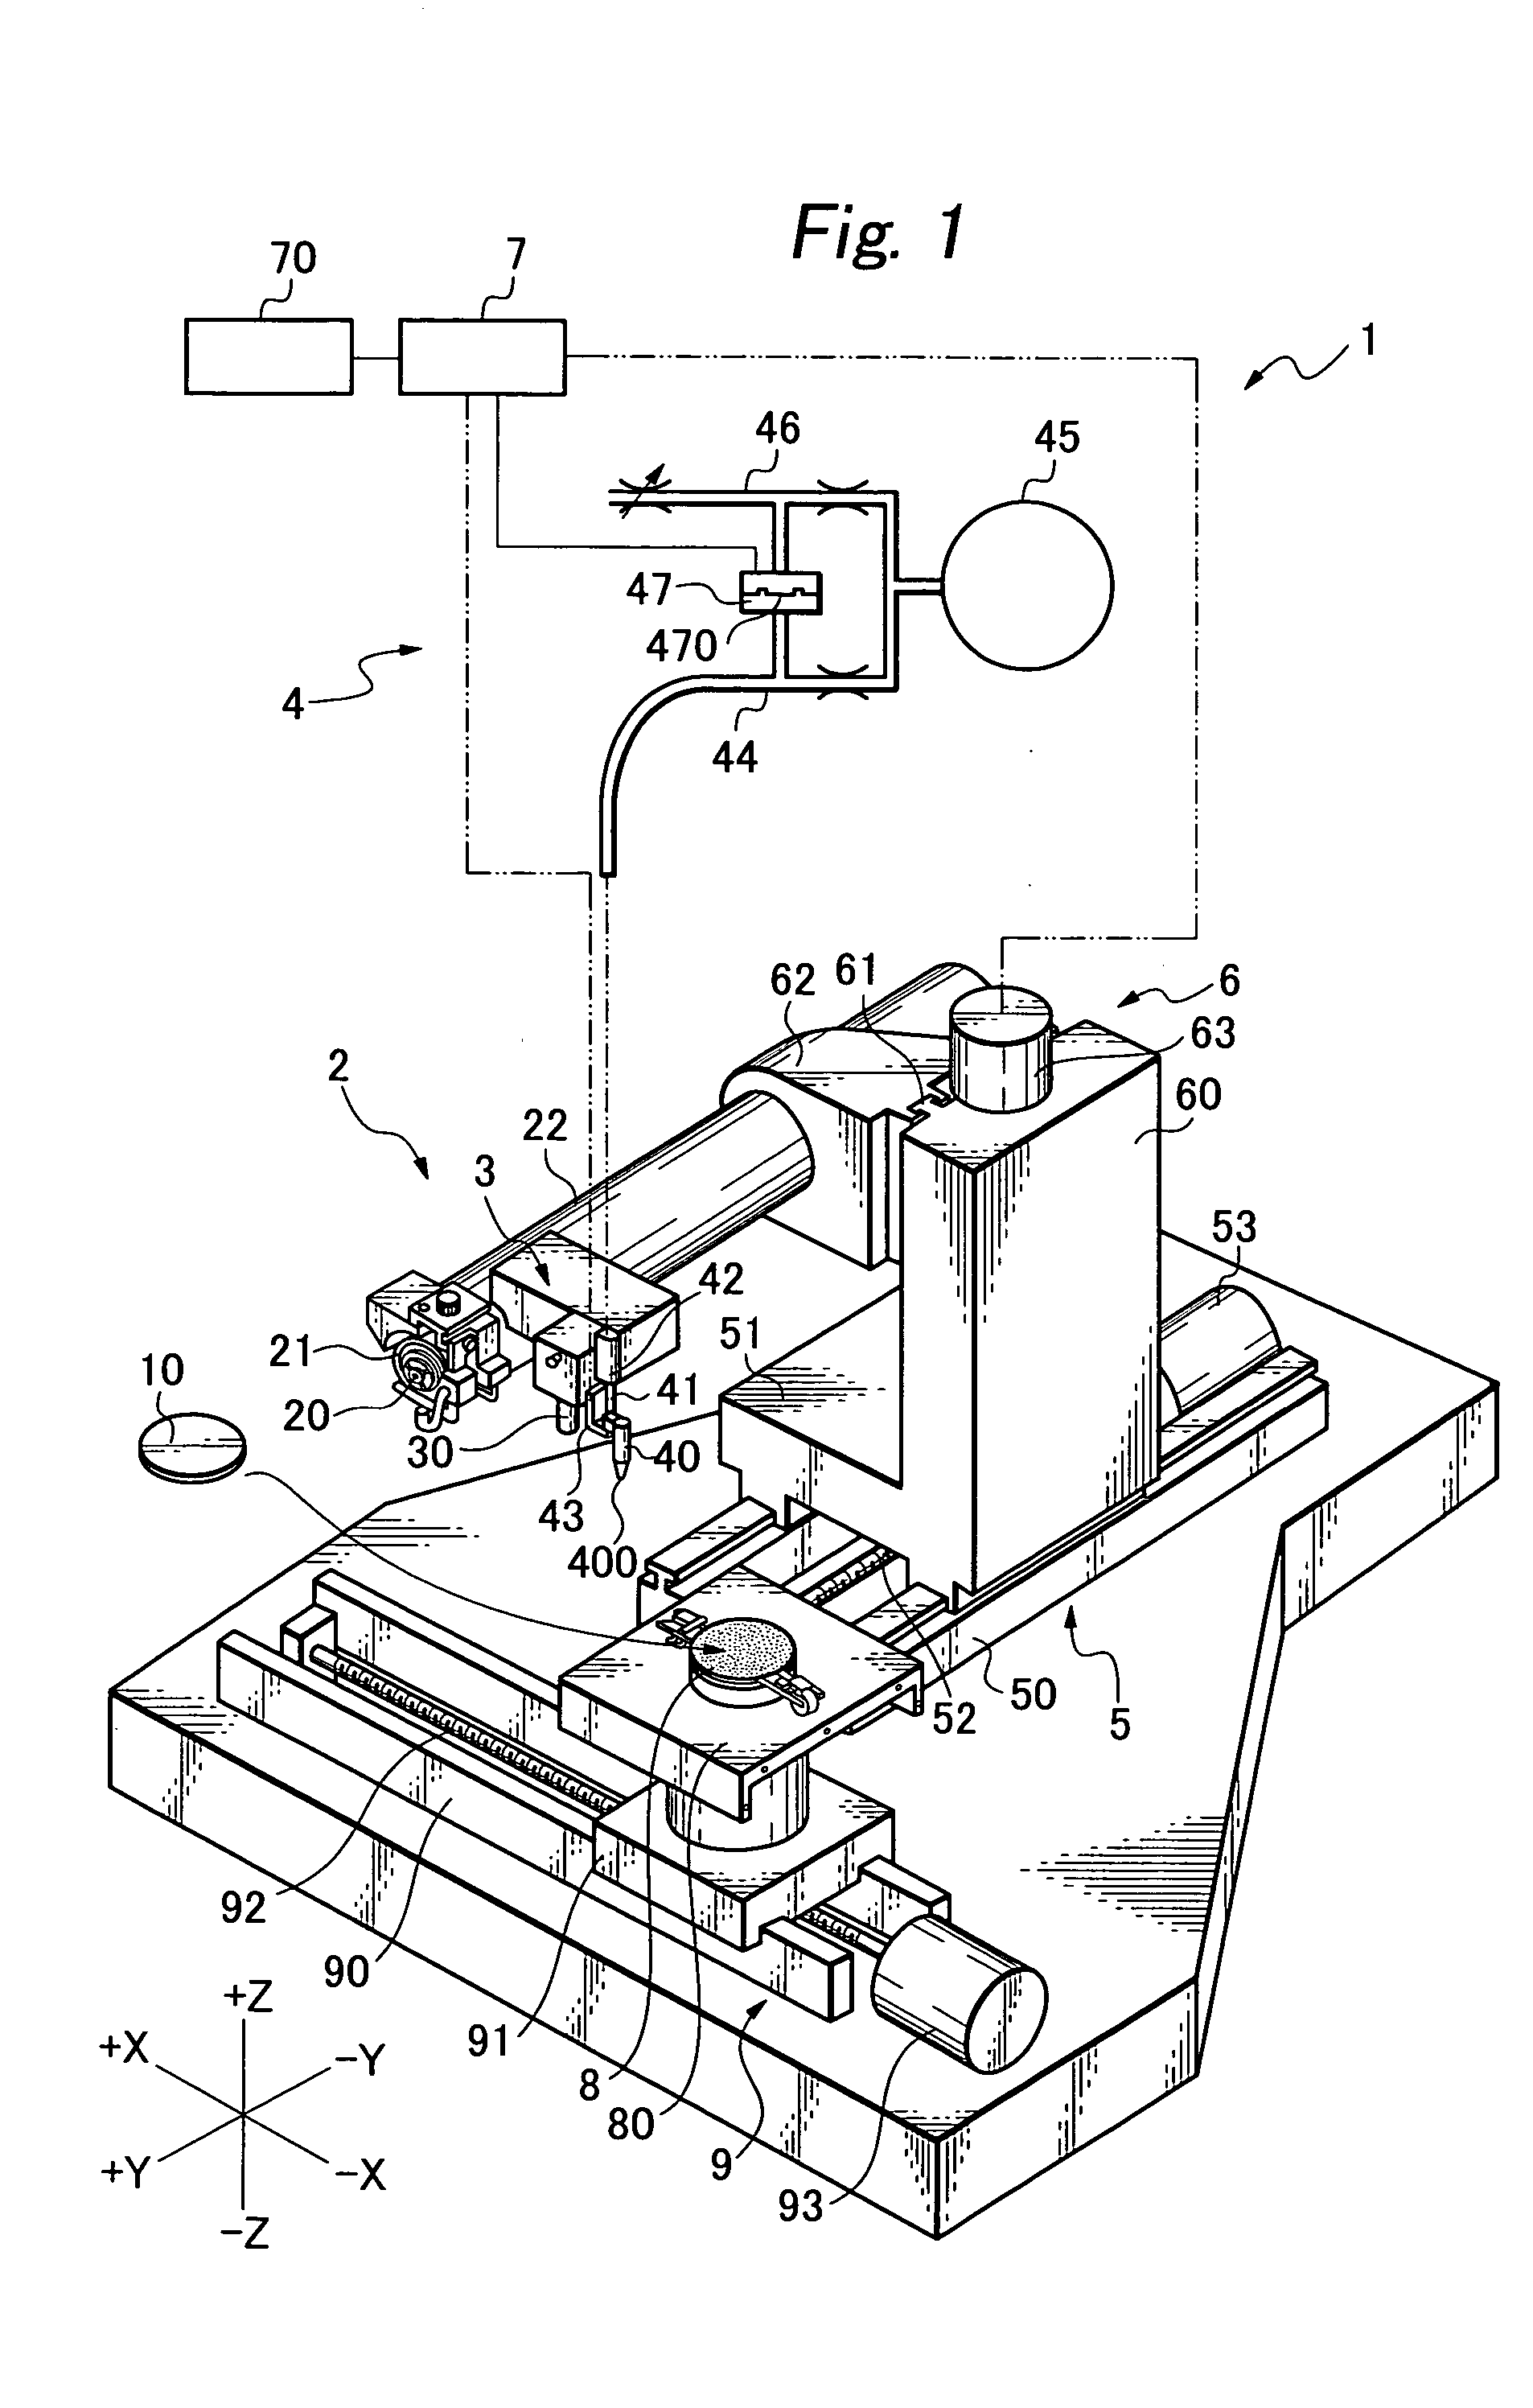 Processing apparatus provided with backpressure sensor